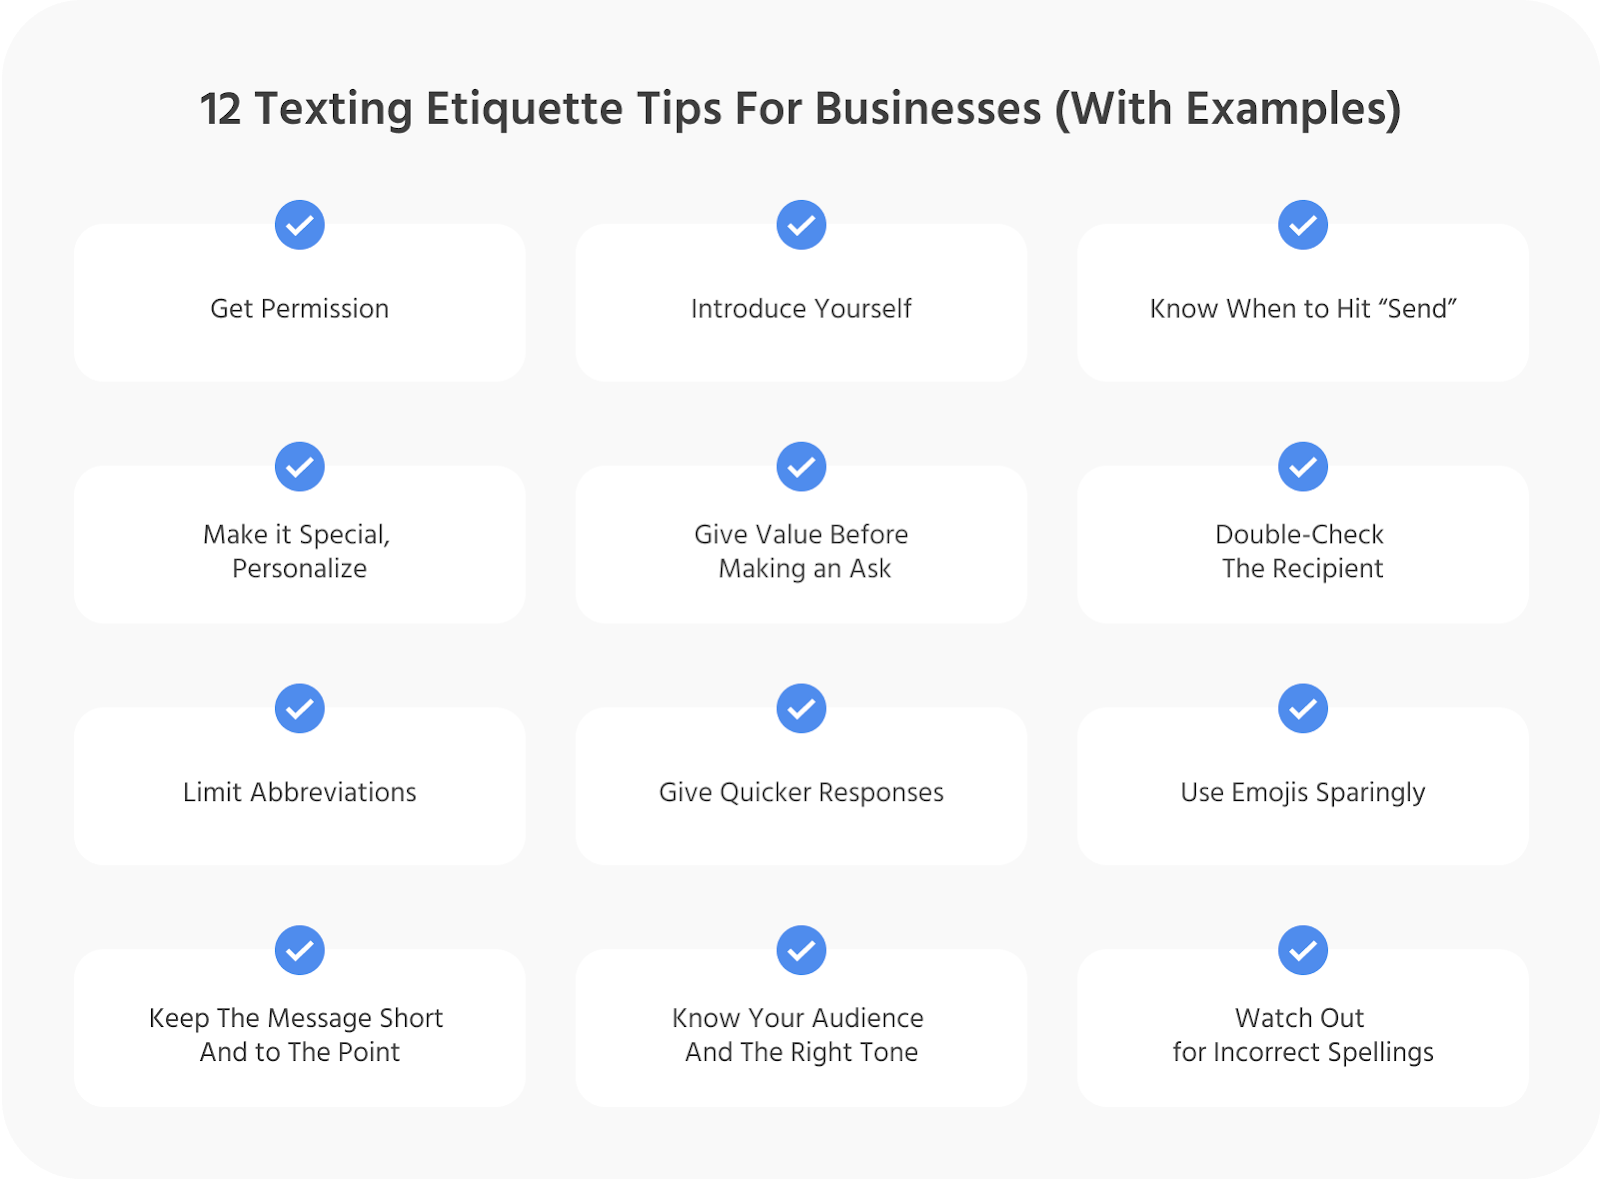 12 Texting Etiquette Tips For Businesses (With Examples)